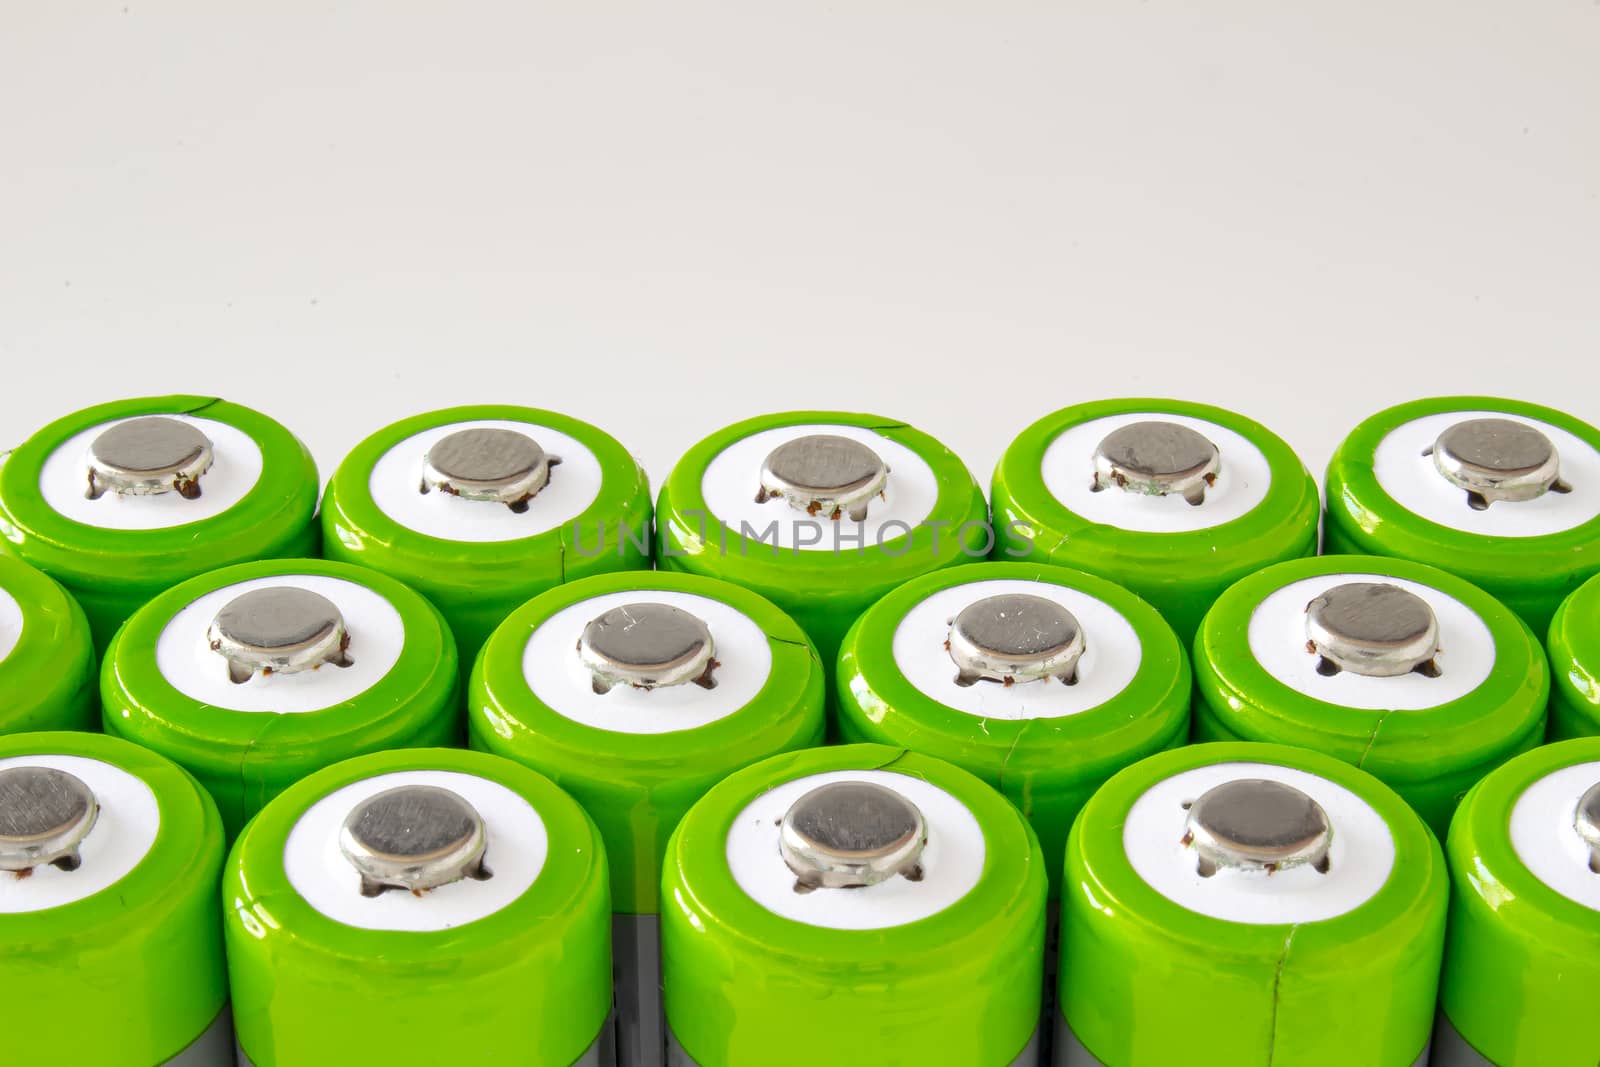 A group of High-Capacity Rechargeable Batteries on a white background